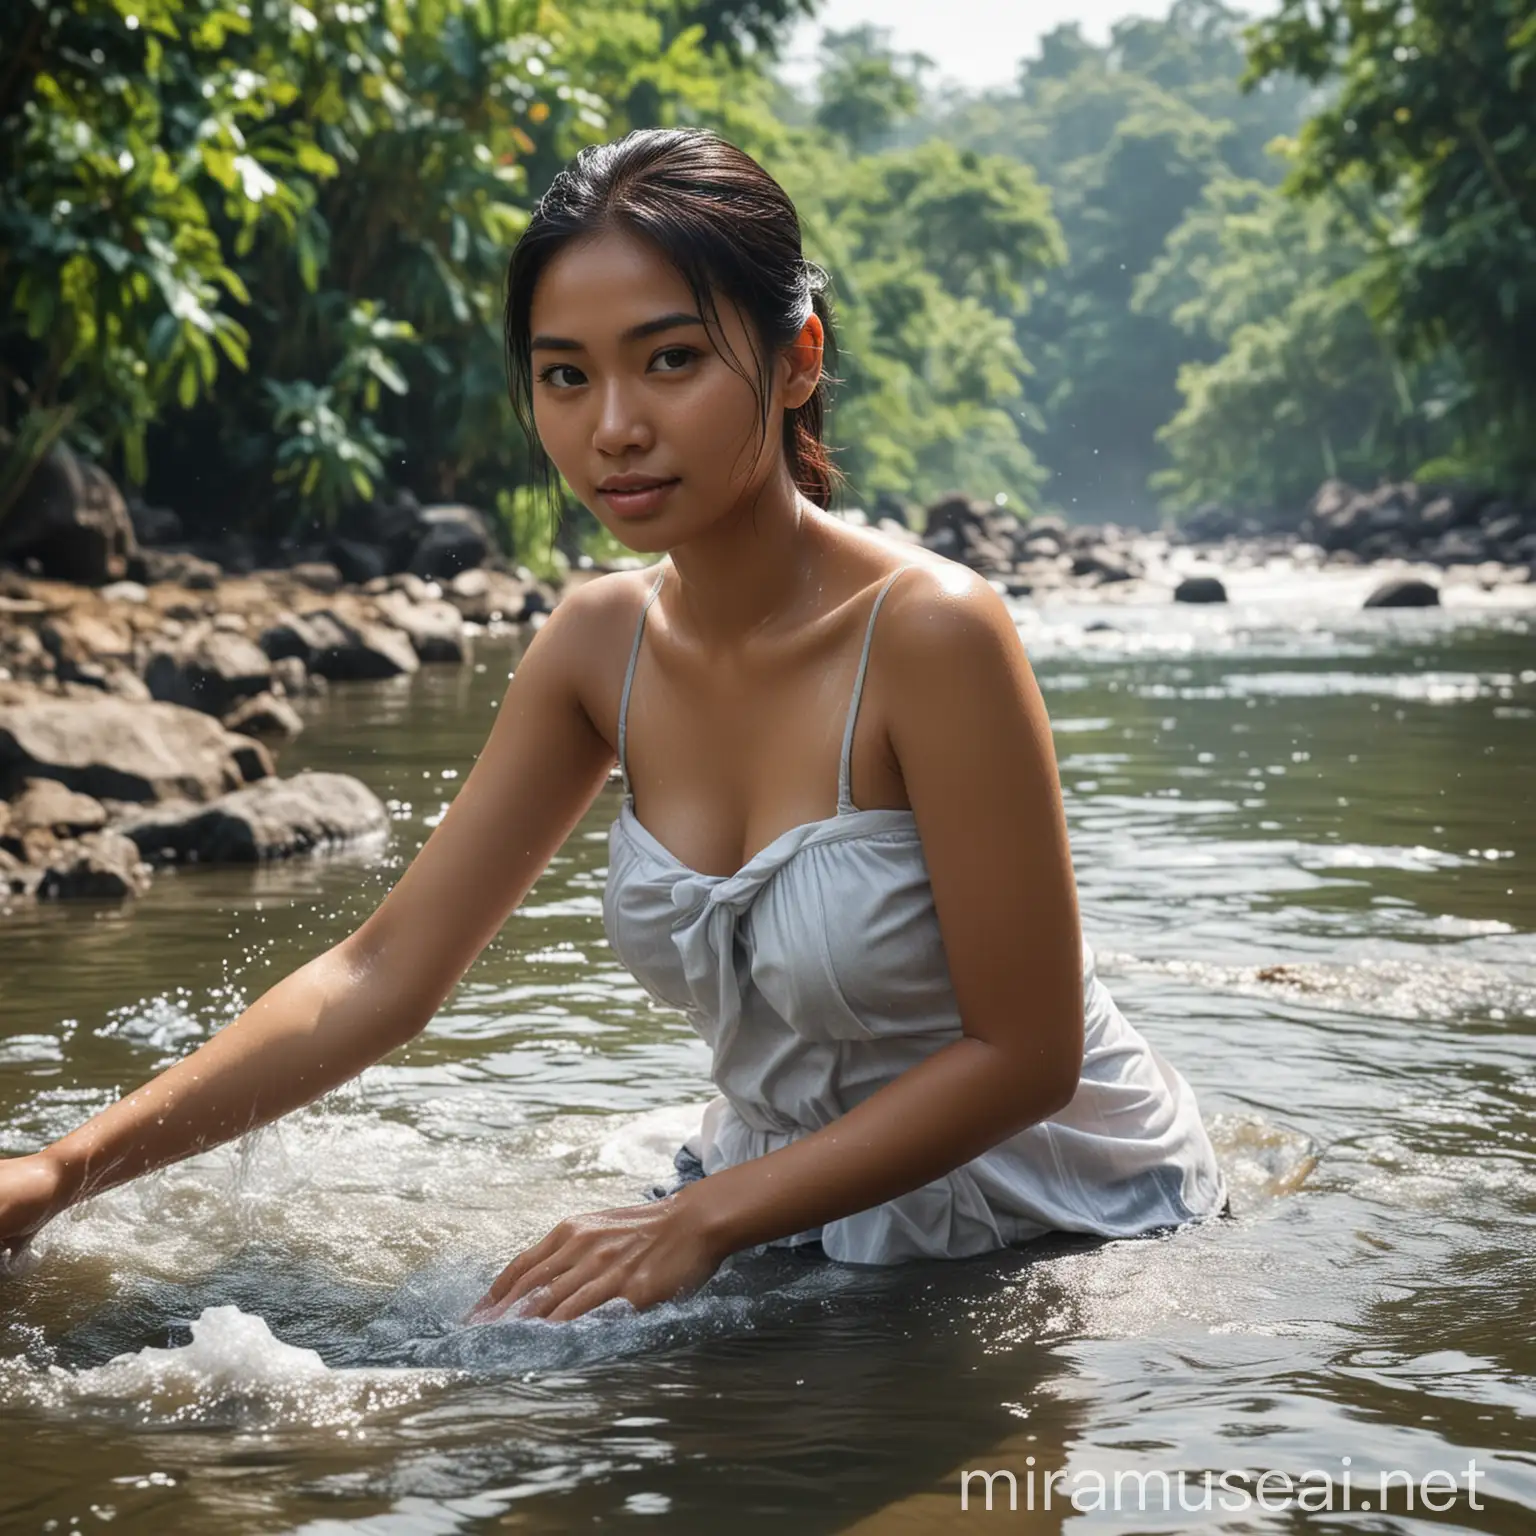 Indonesian Woman Bathing and Washing Clothes in River